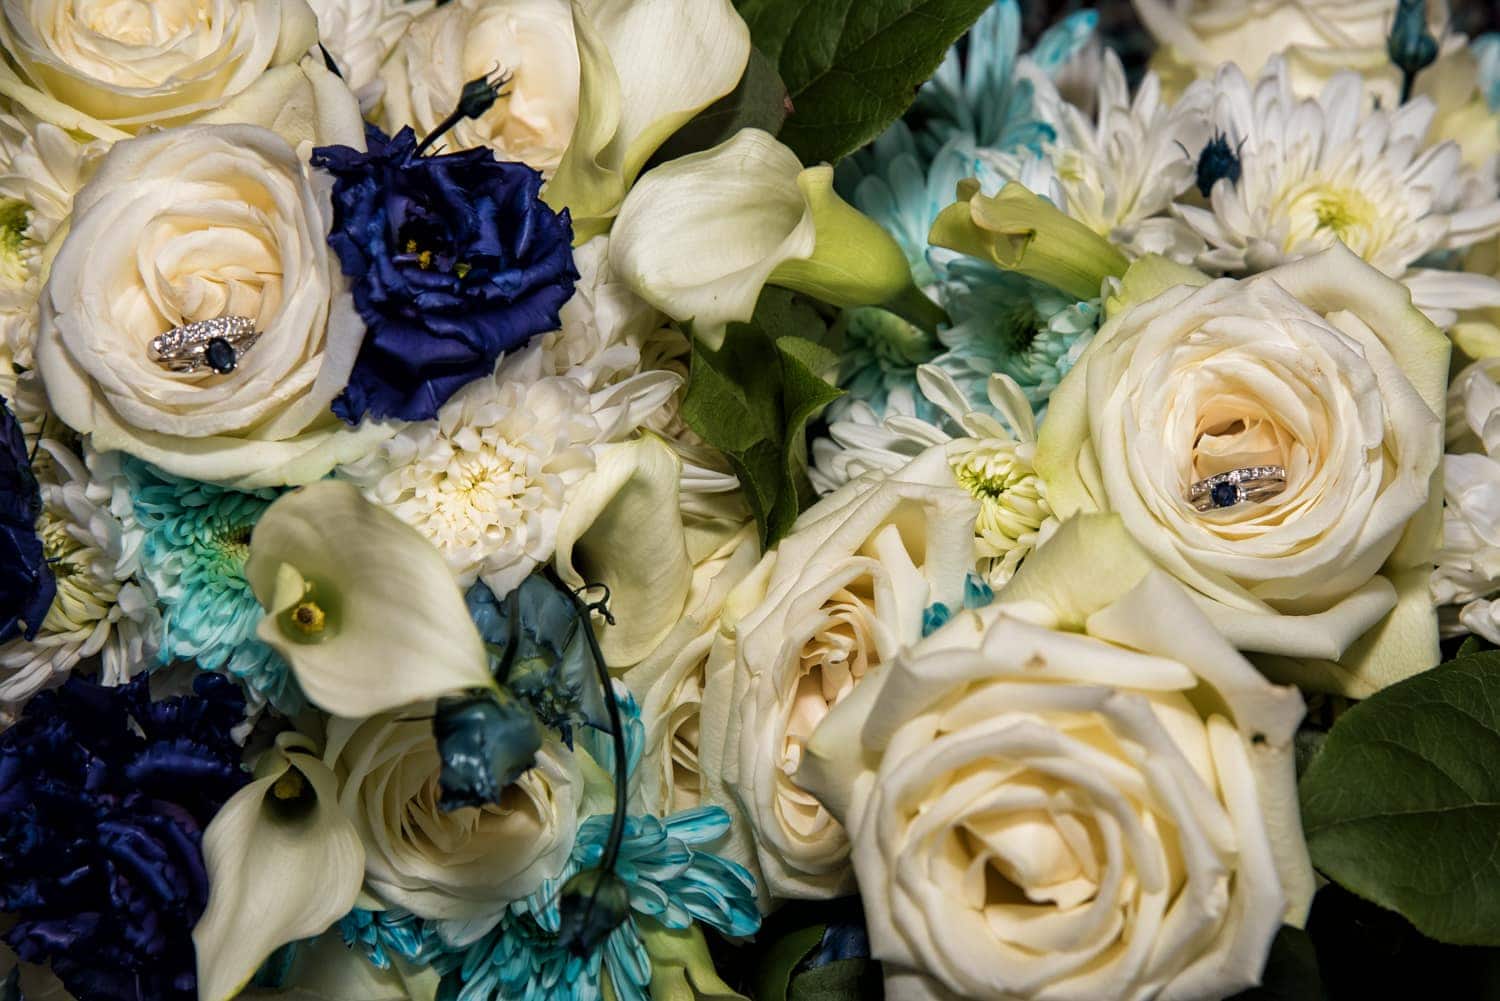 A wedding bridal bouquet of ivory and navy roses and flowers.